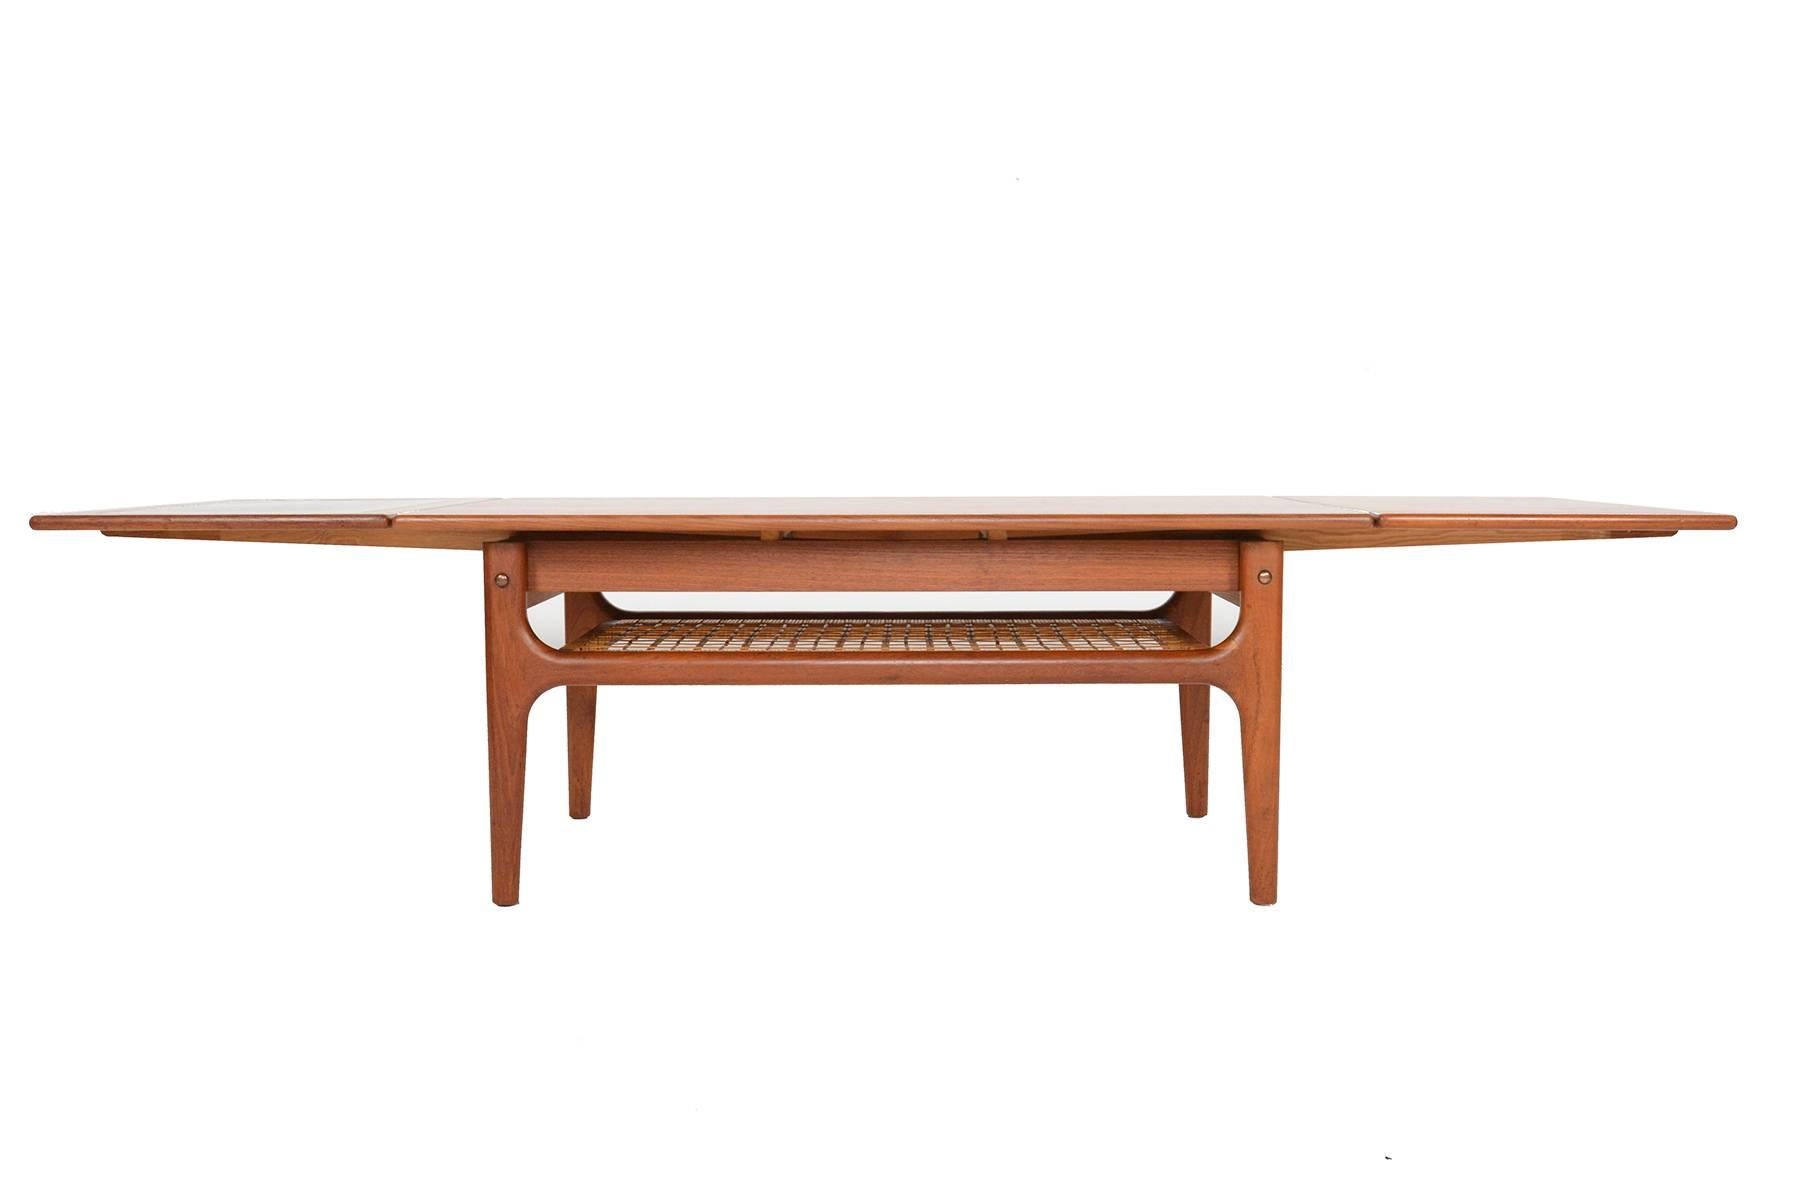 This Danish modern Mid-Century surfboard coffee table in teak by Trioh is beautifully designed. The rectangular teak slab features a softly sculpted lip. Two leaves extend from underneath the table. One leaf features an original laminate lined